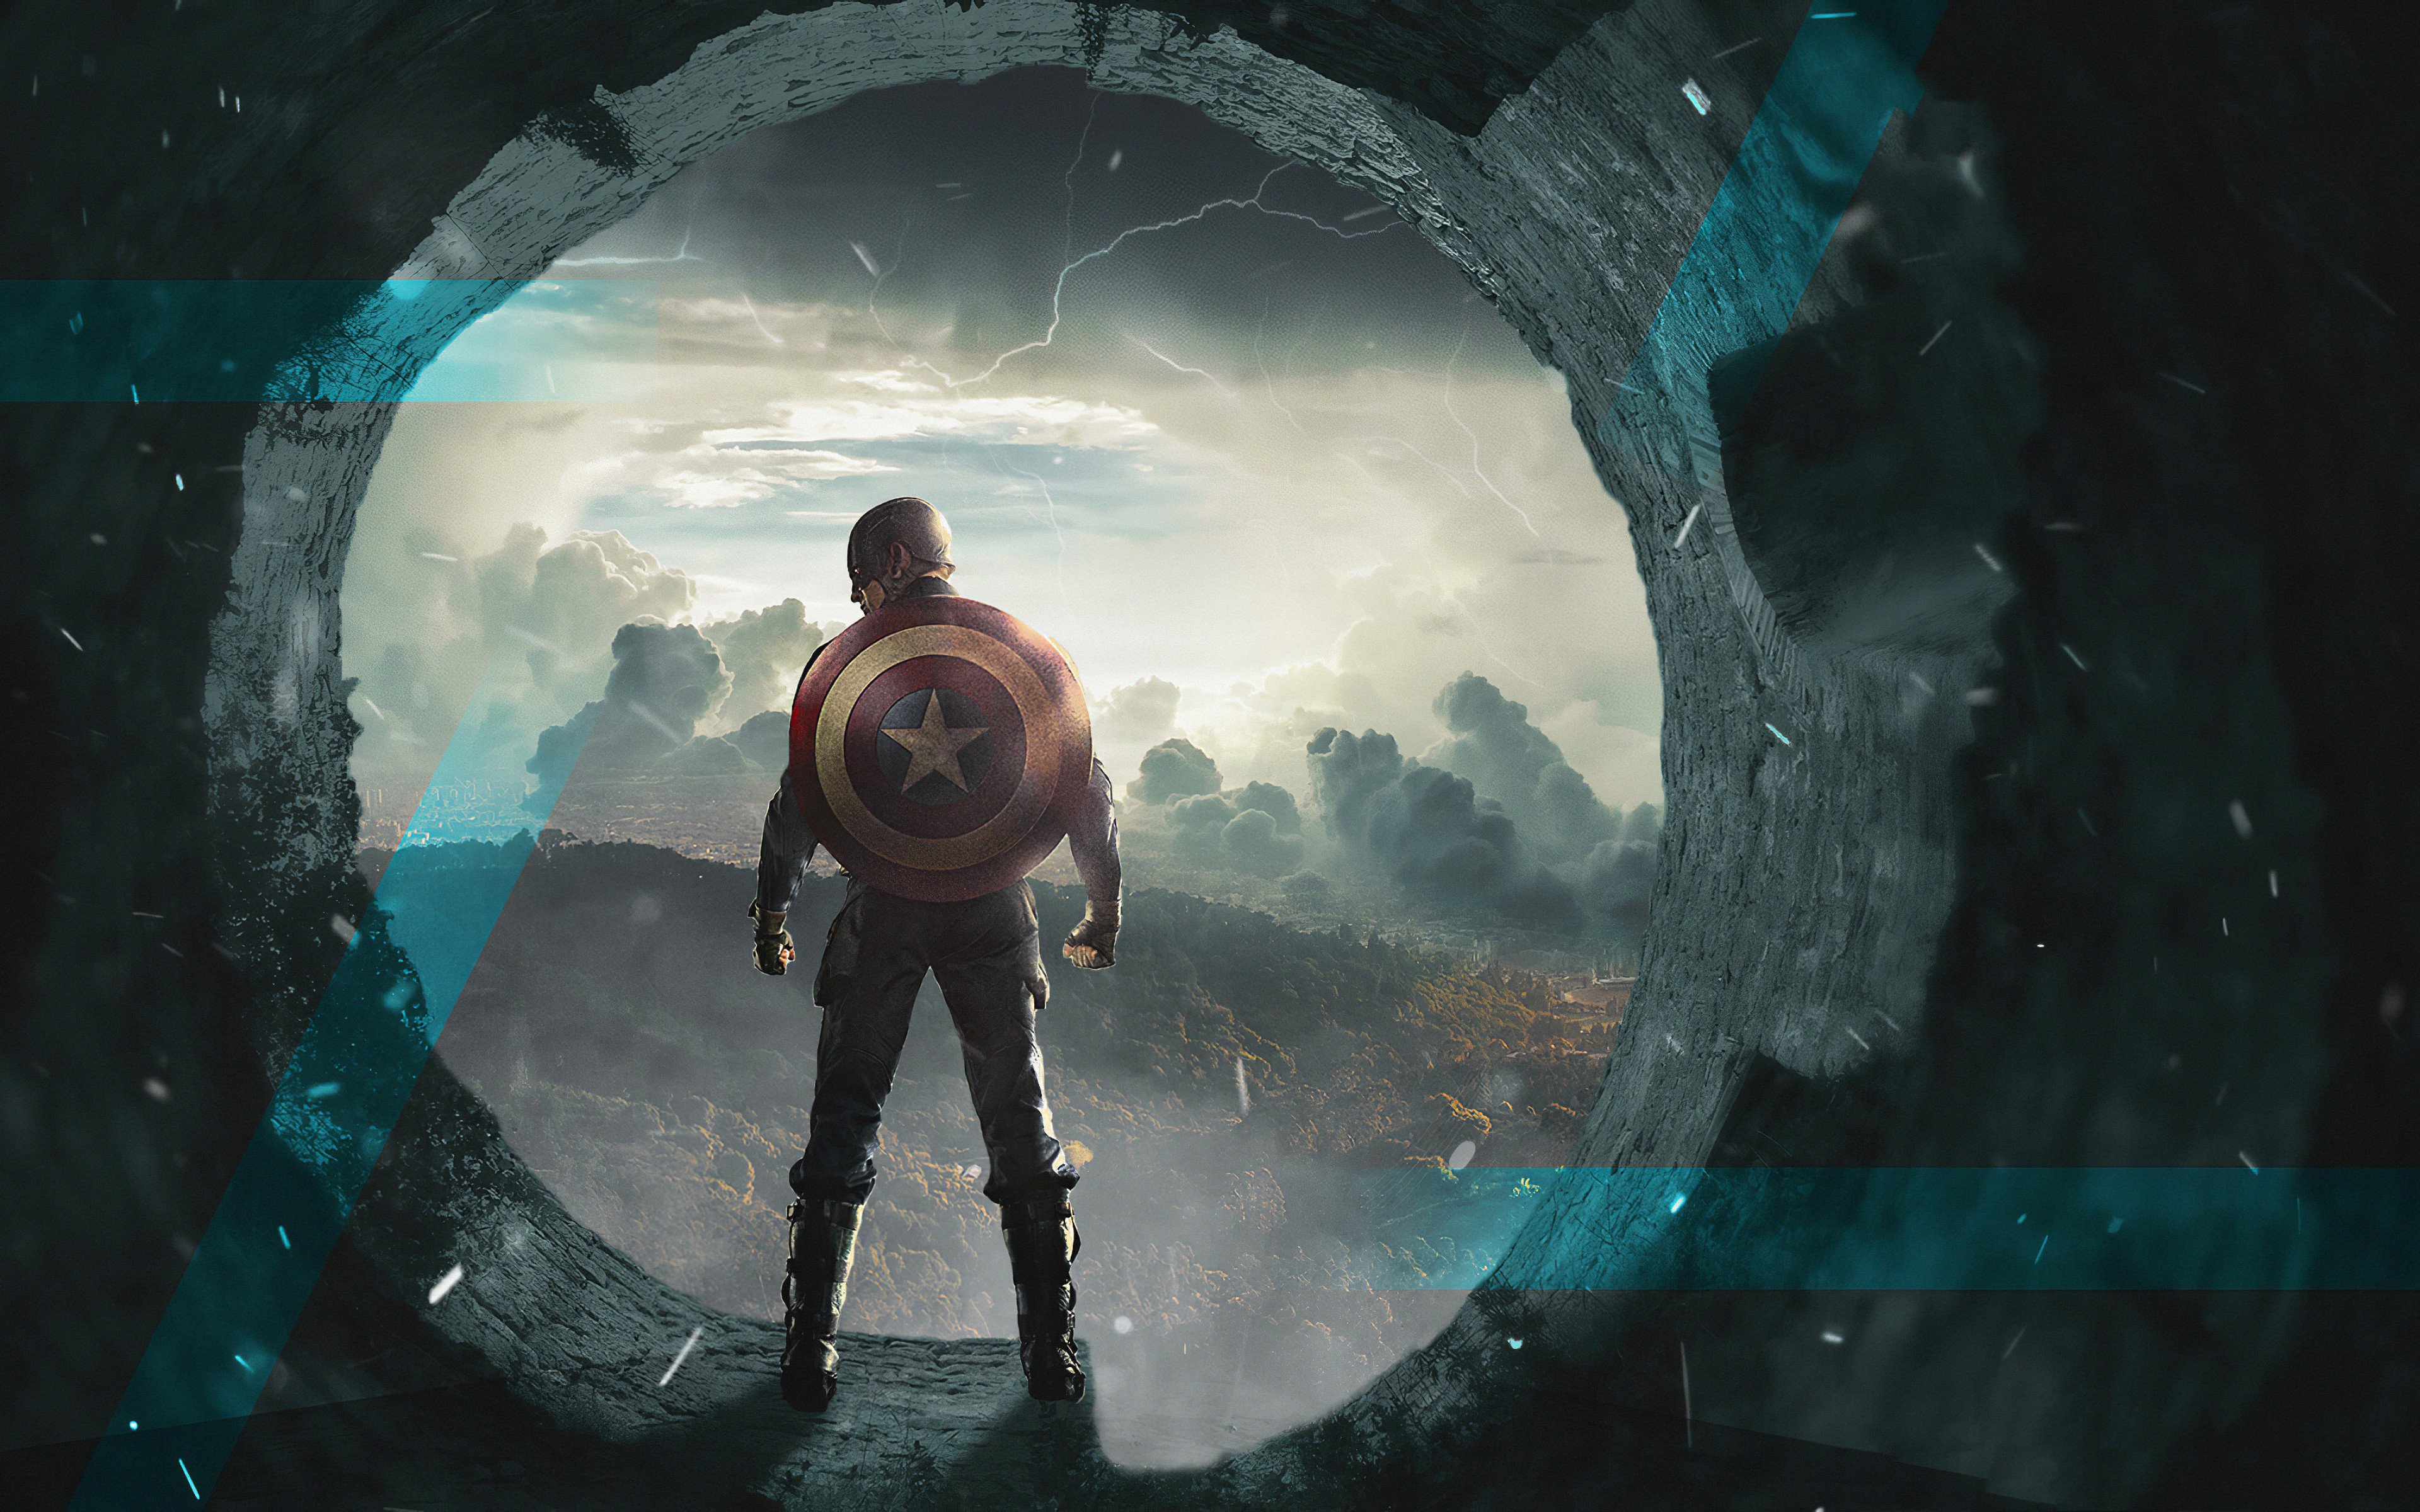 Captain America from the back Wallpaper 4k Ultra HD ID:4527